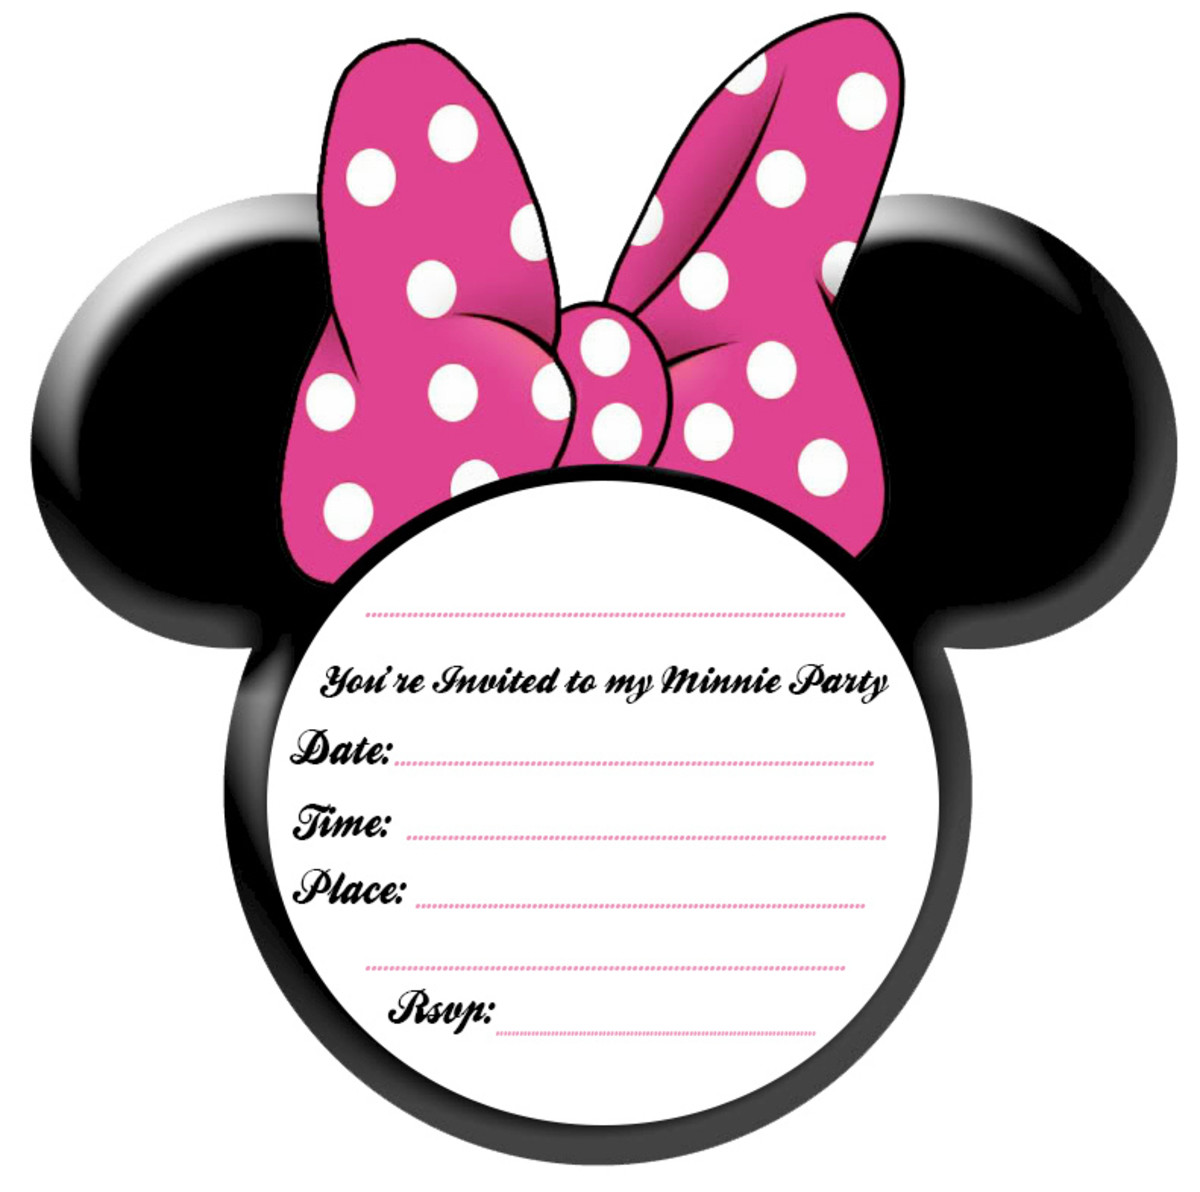 minnie-mouse-party-ideas-and-free-printables-hubpages